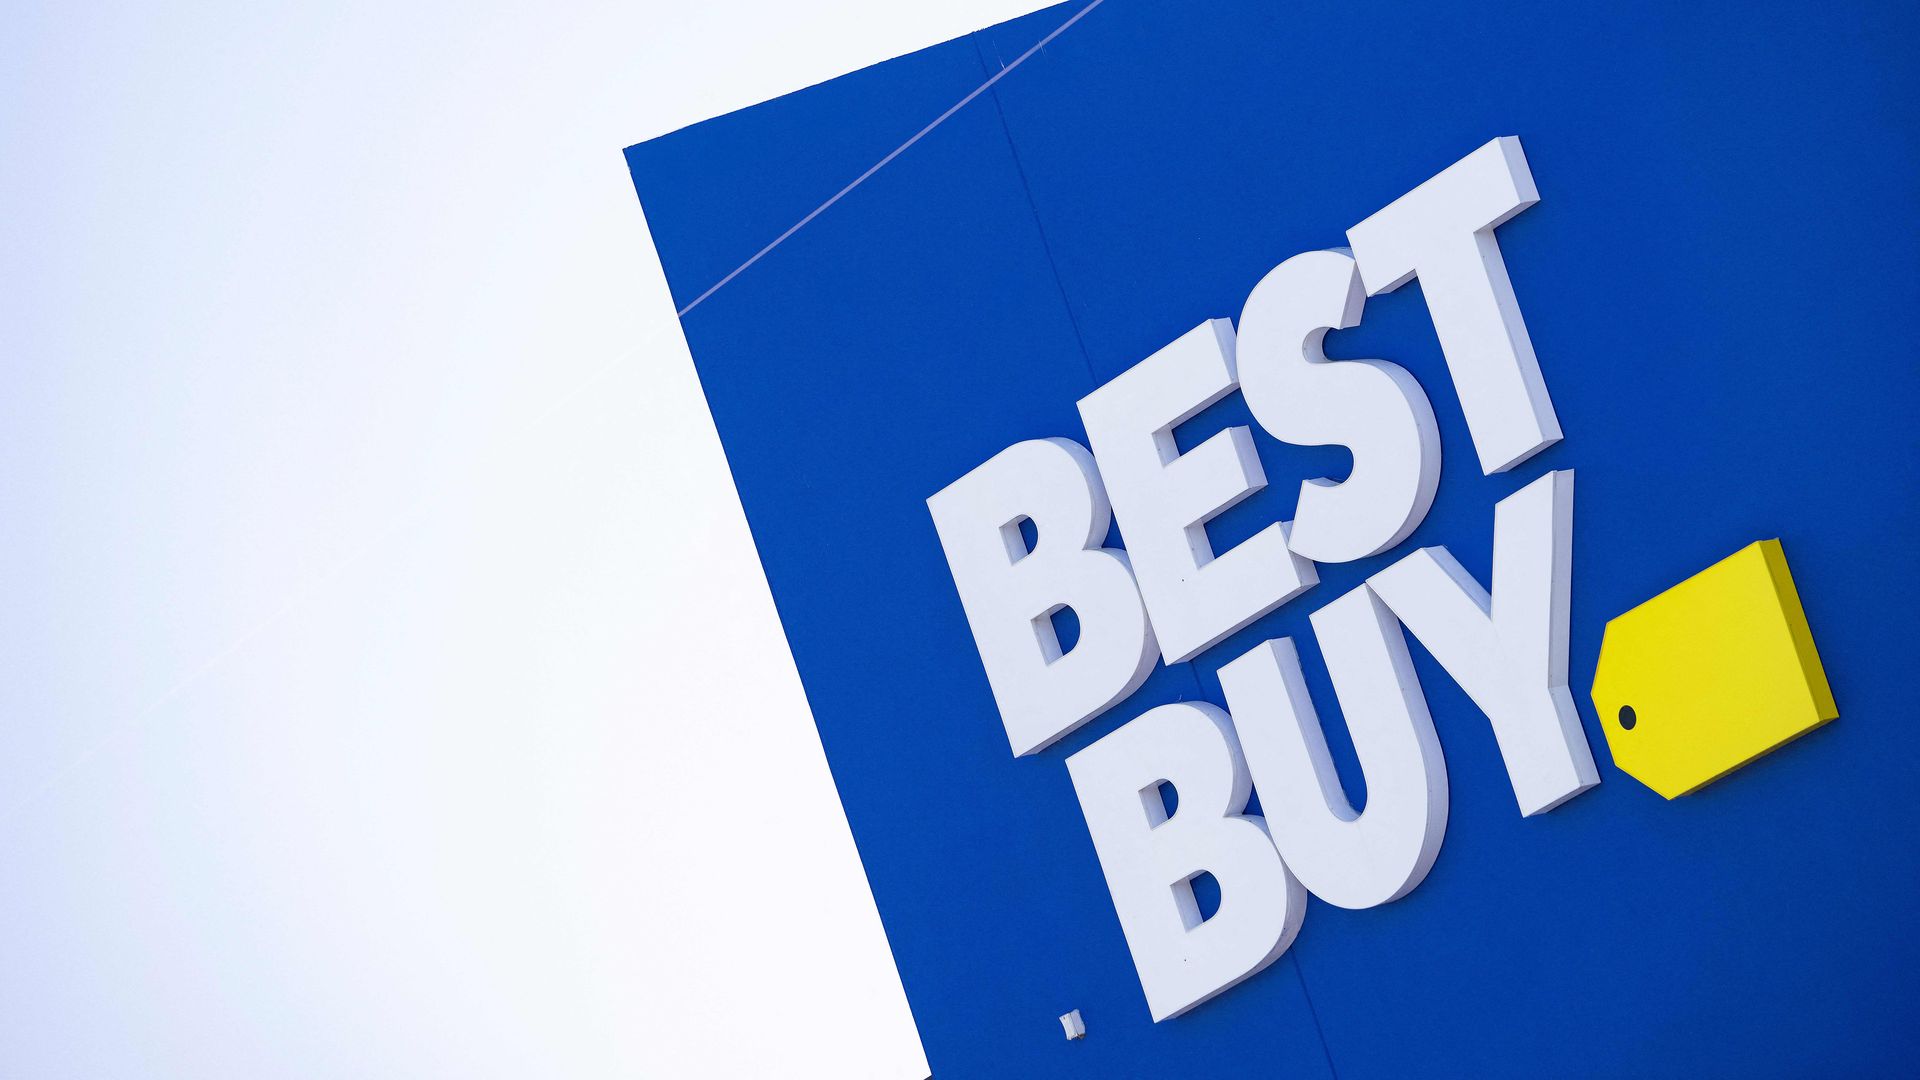 Best Buy: Blu-ray, DVD owners will soon be out of luck